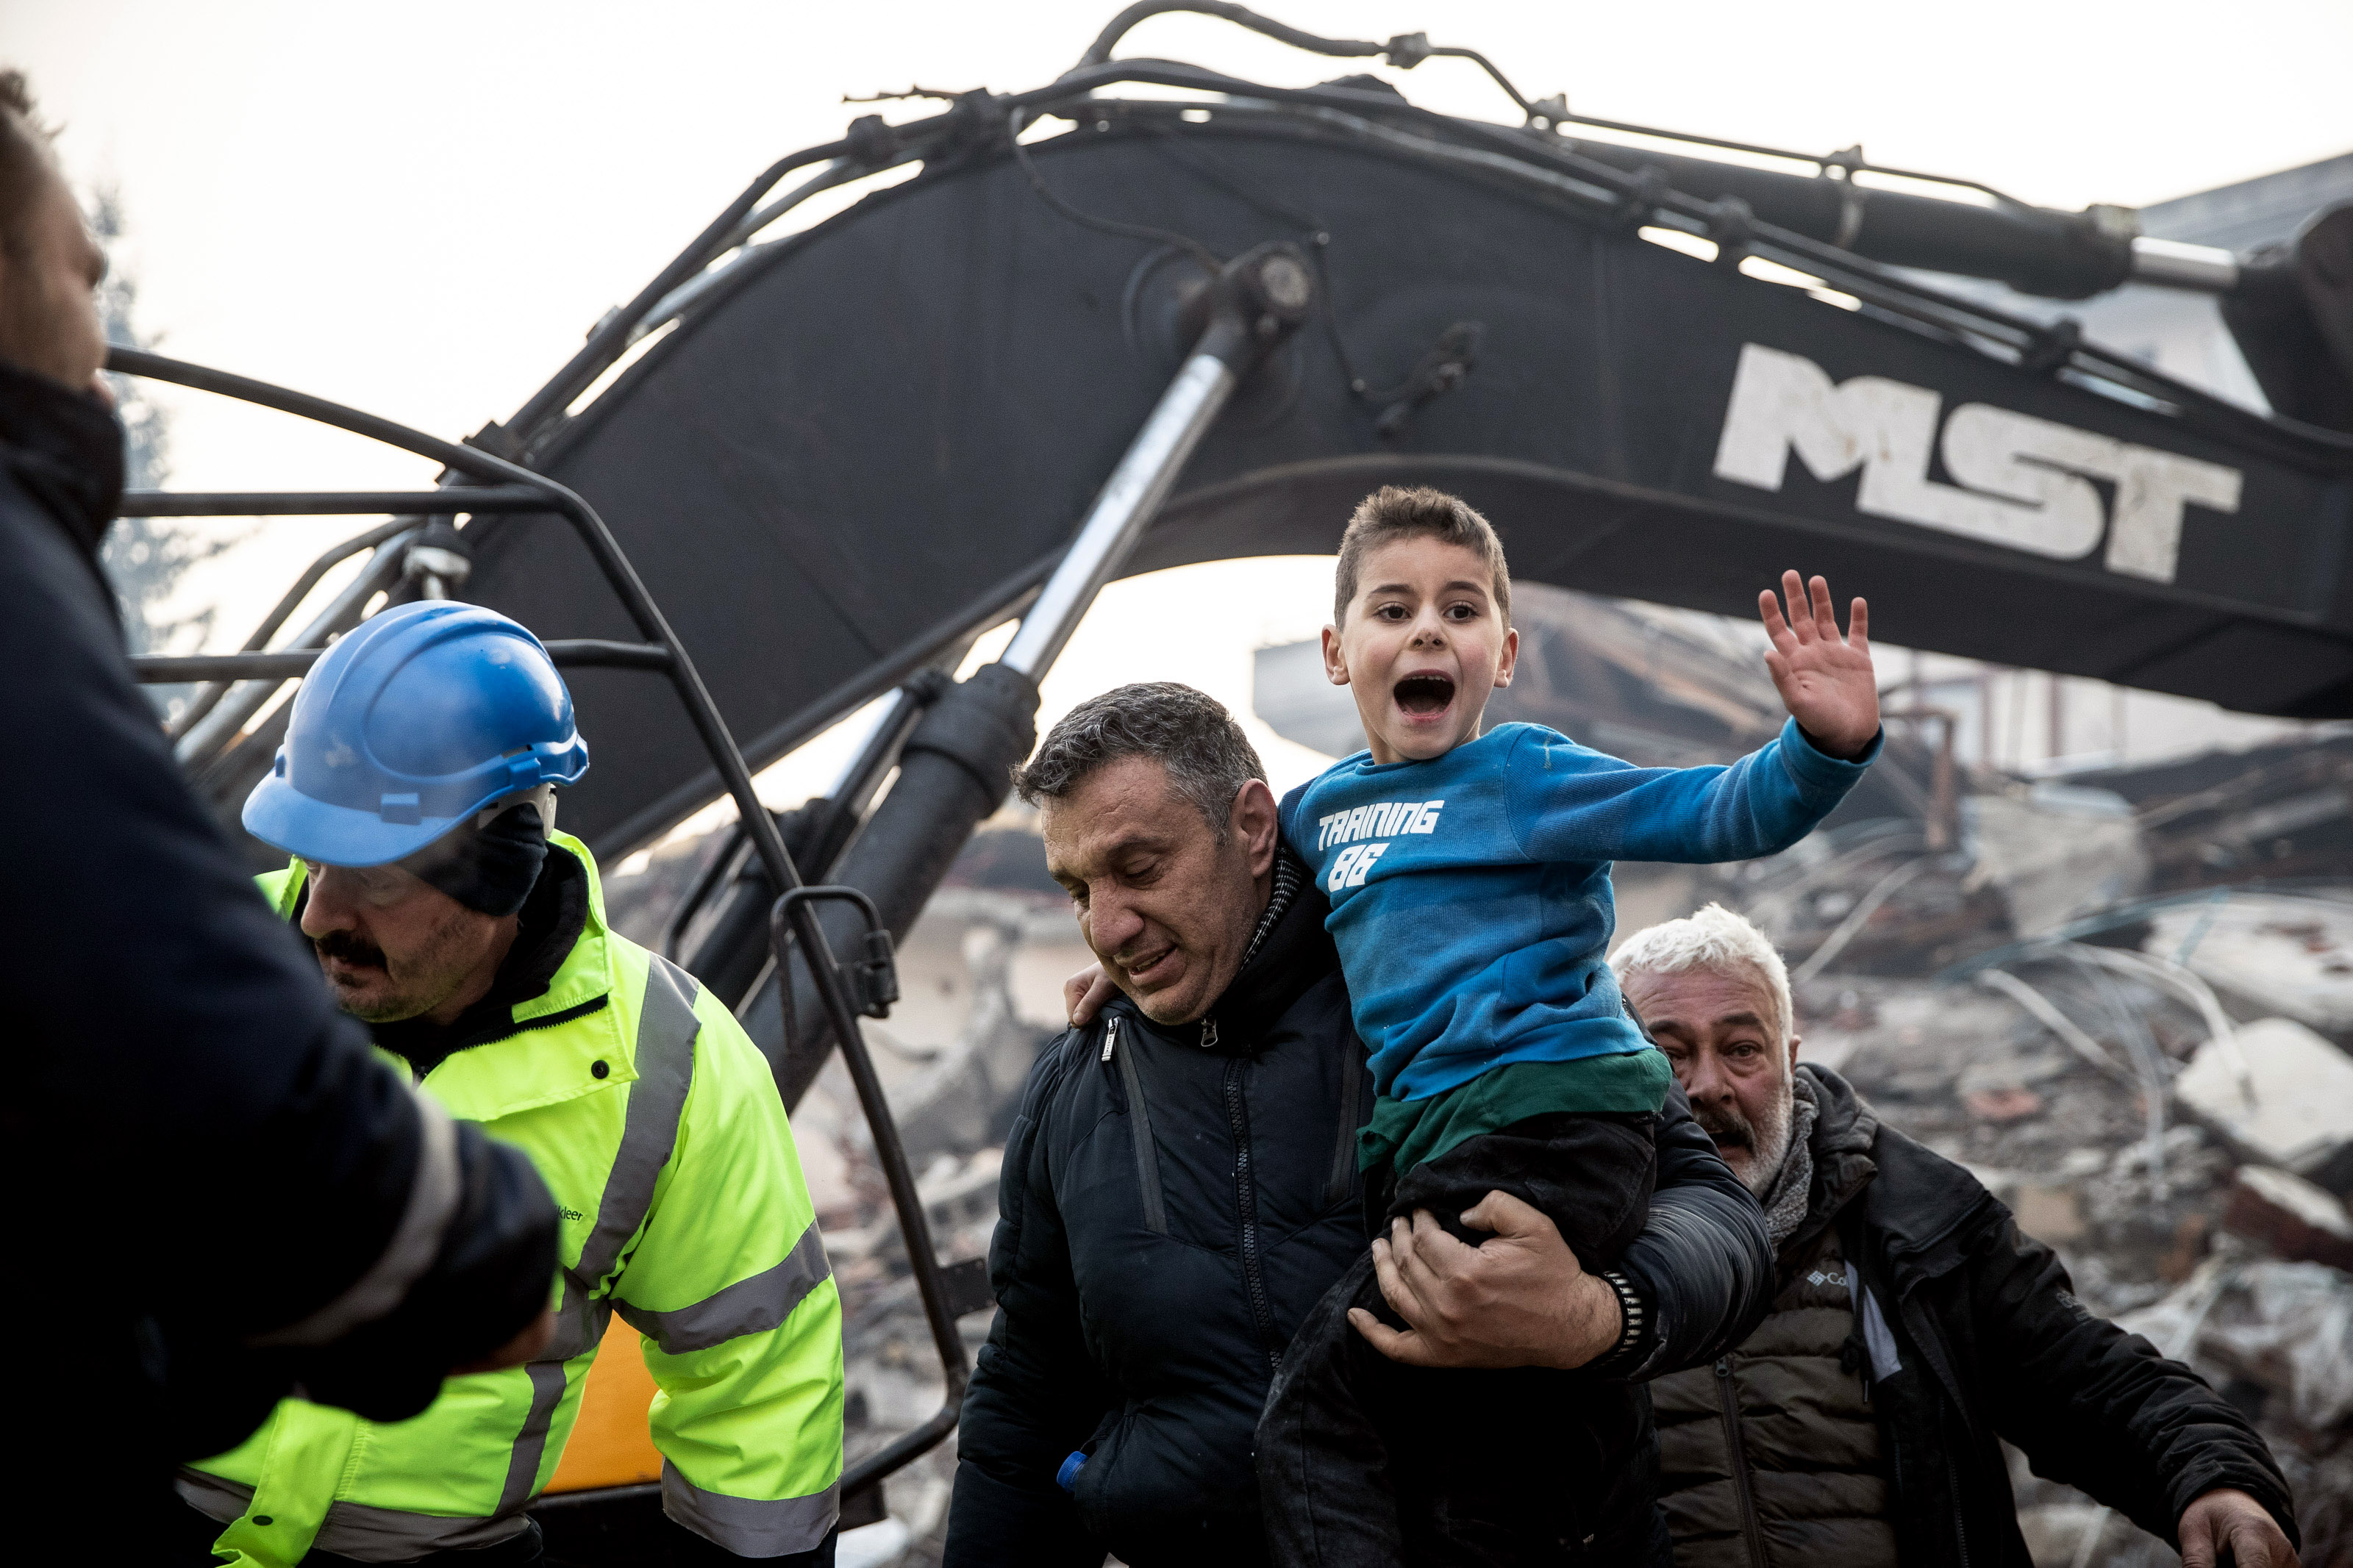 Dramatic photos show the moment an 8-year-old survivor was rescued and reunited with his mother